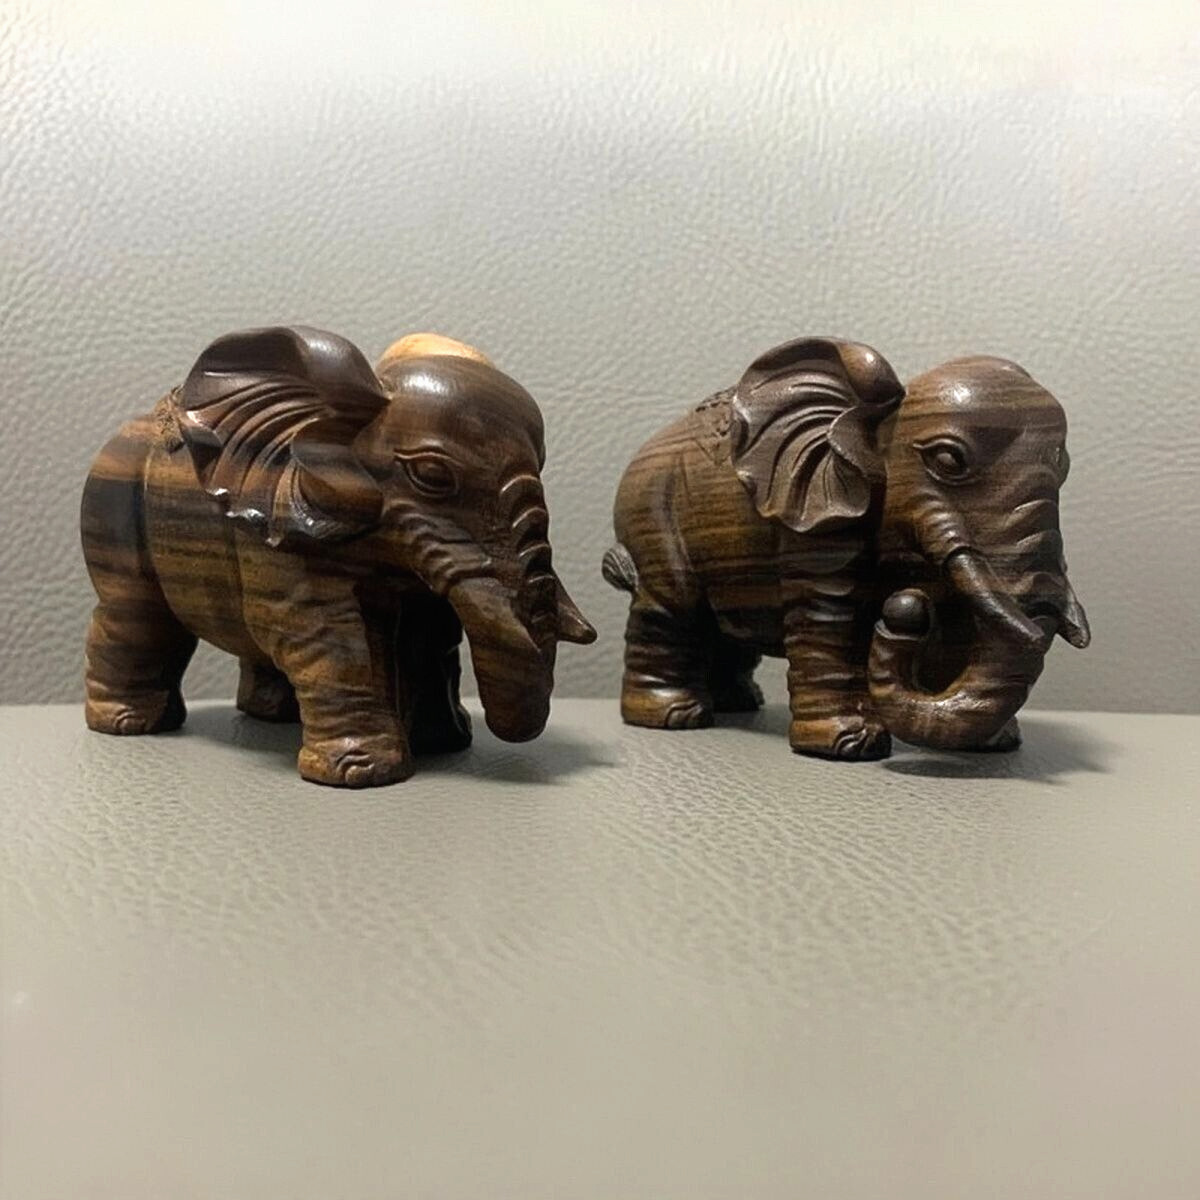 2pcs antique collection handicrafts agarwood carved elephant statues ornaments